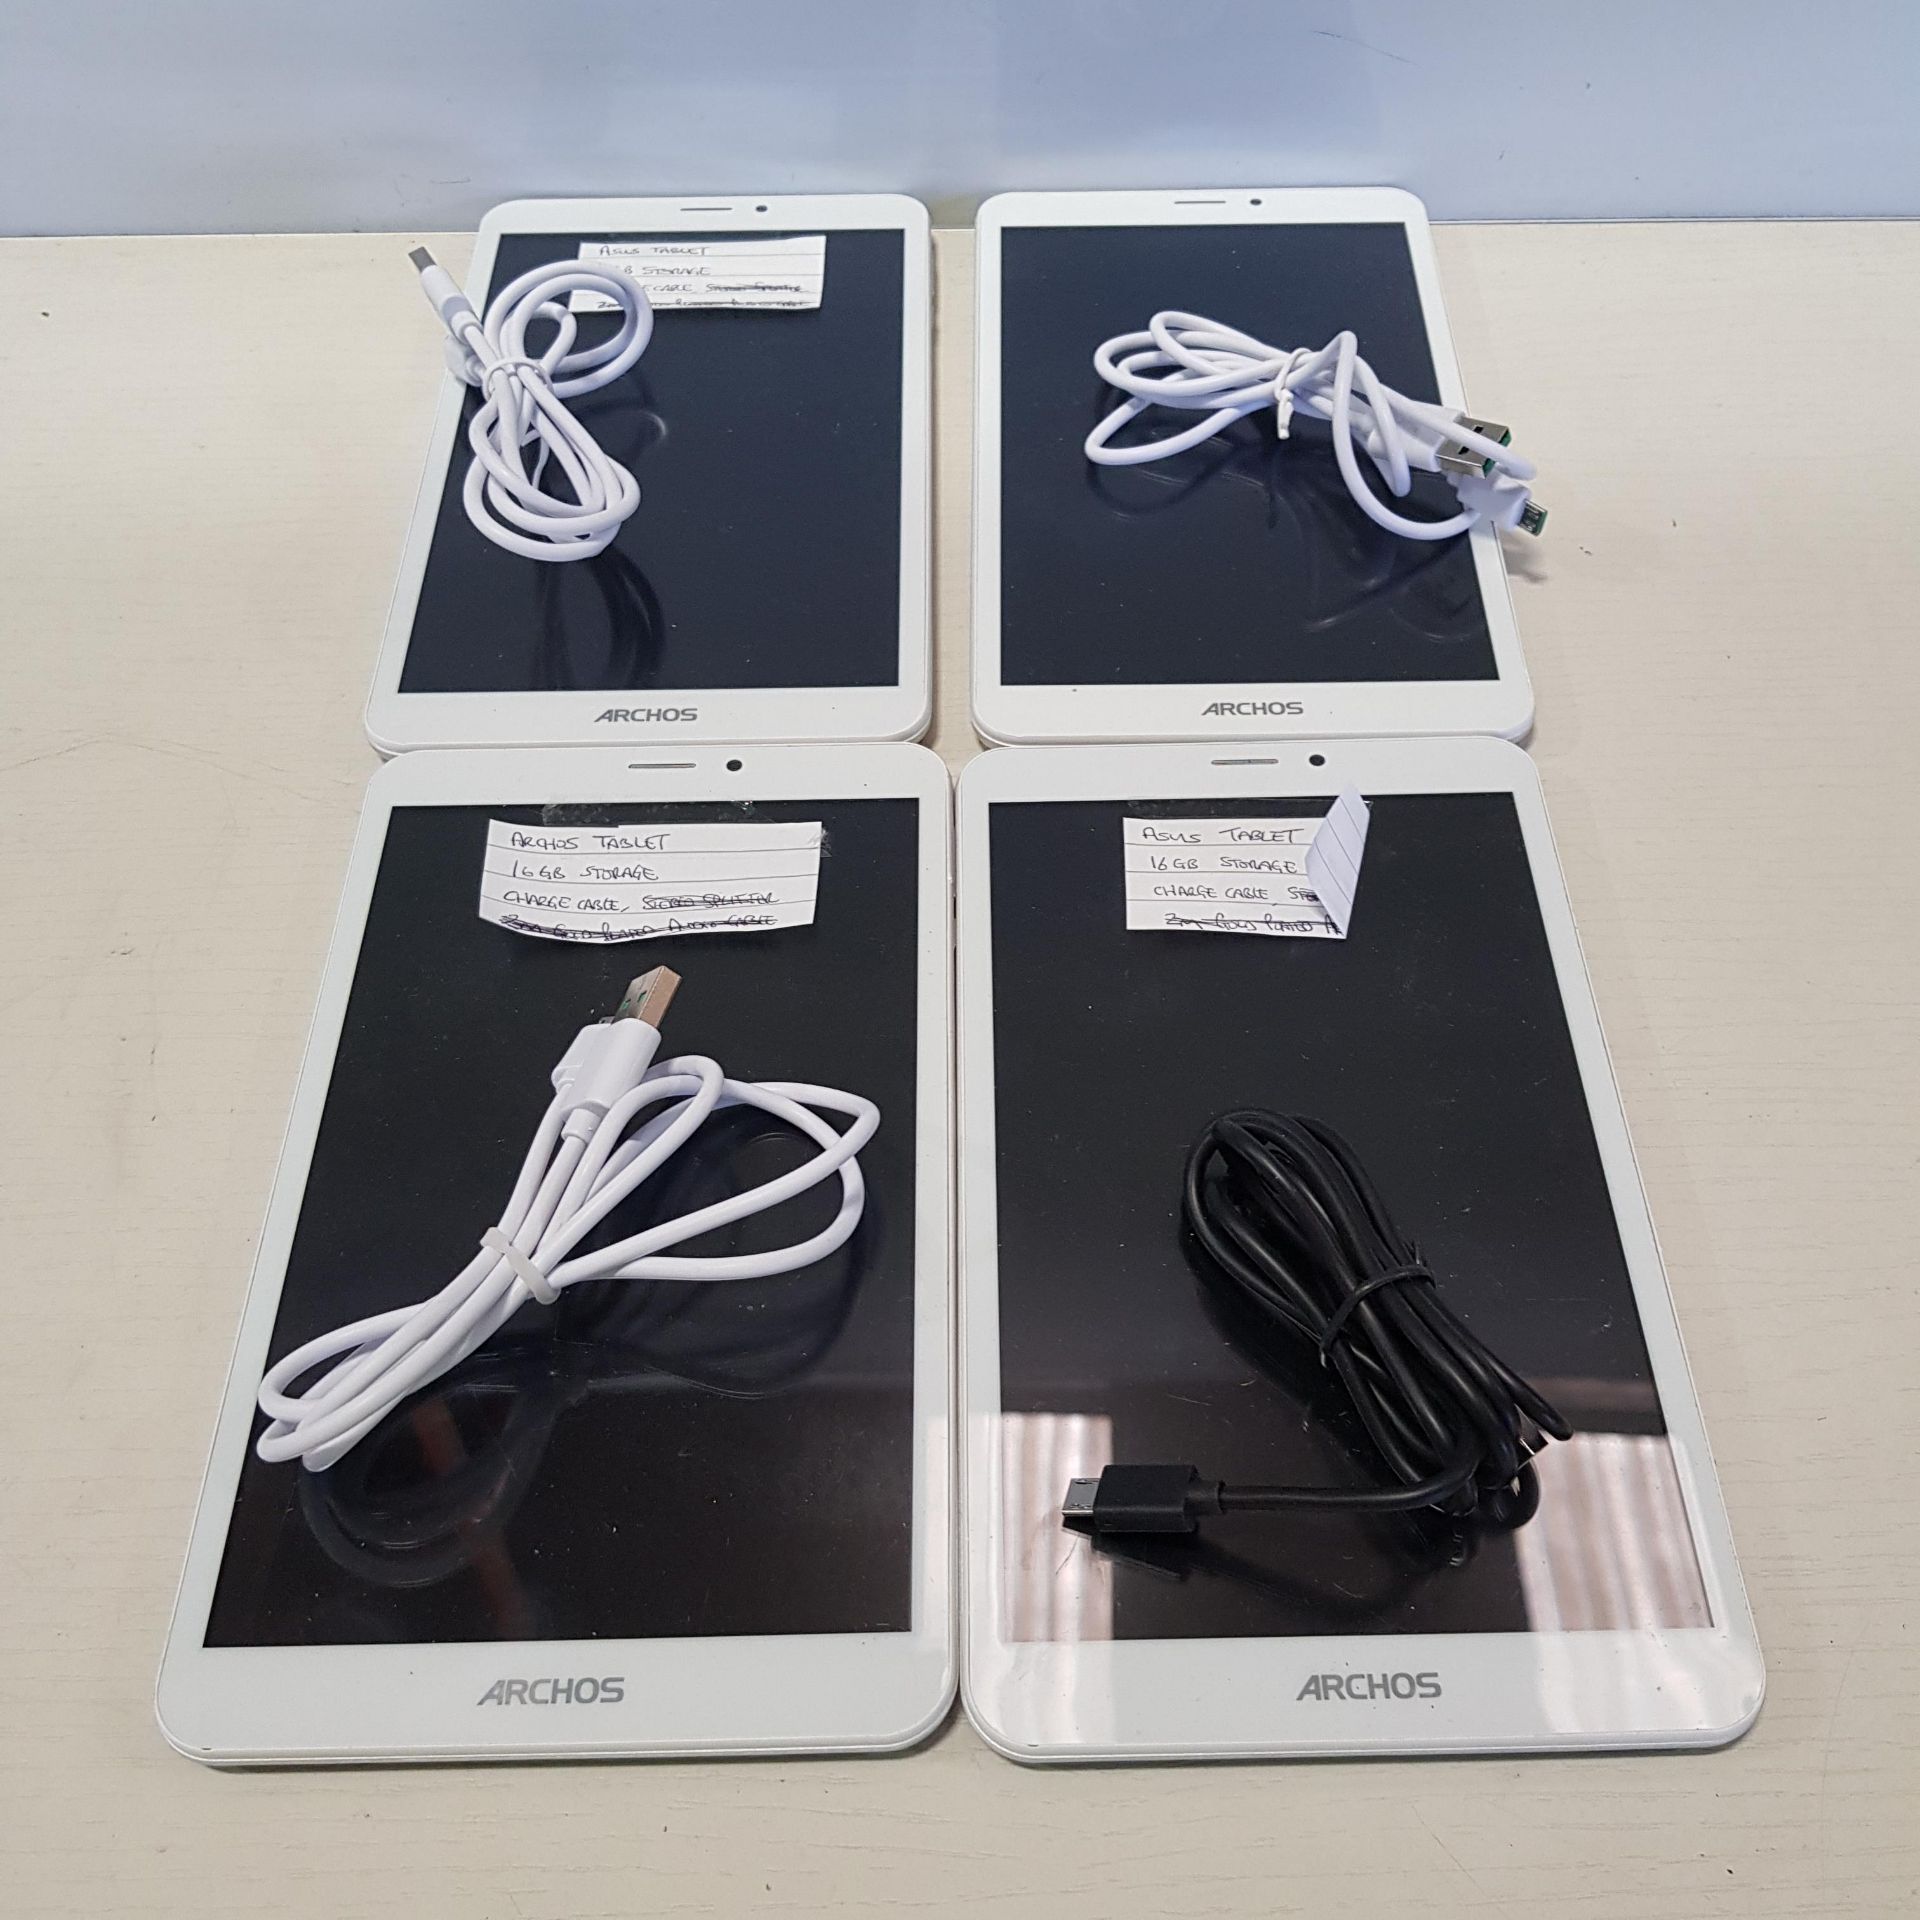 4 X ASUS TABLETS - 16 GB STORAGE WITH CHARGING CABLES (NO POWER PLUGS)